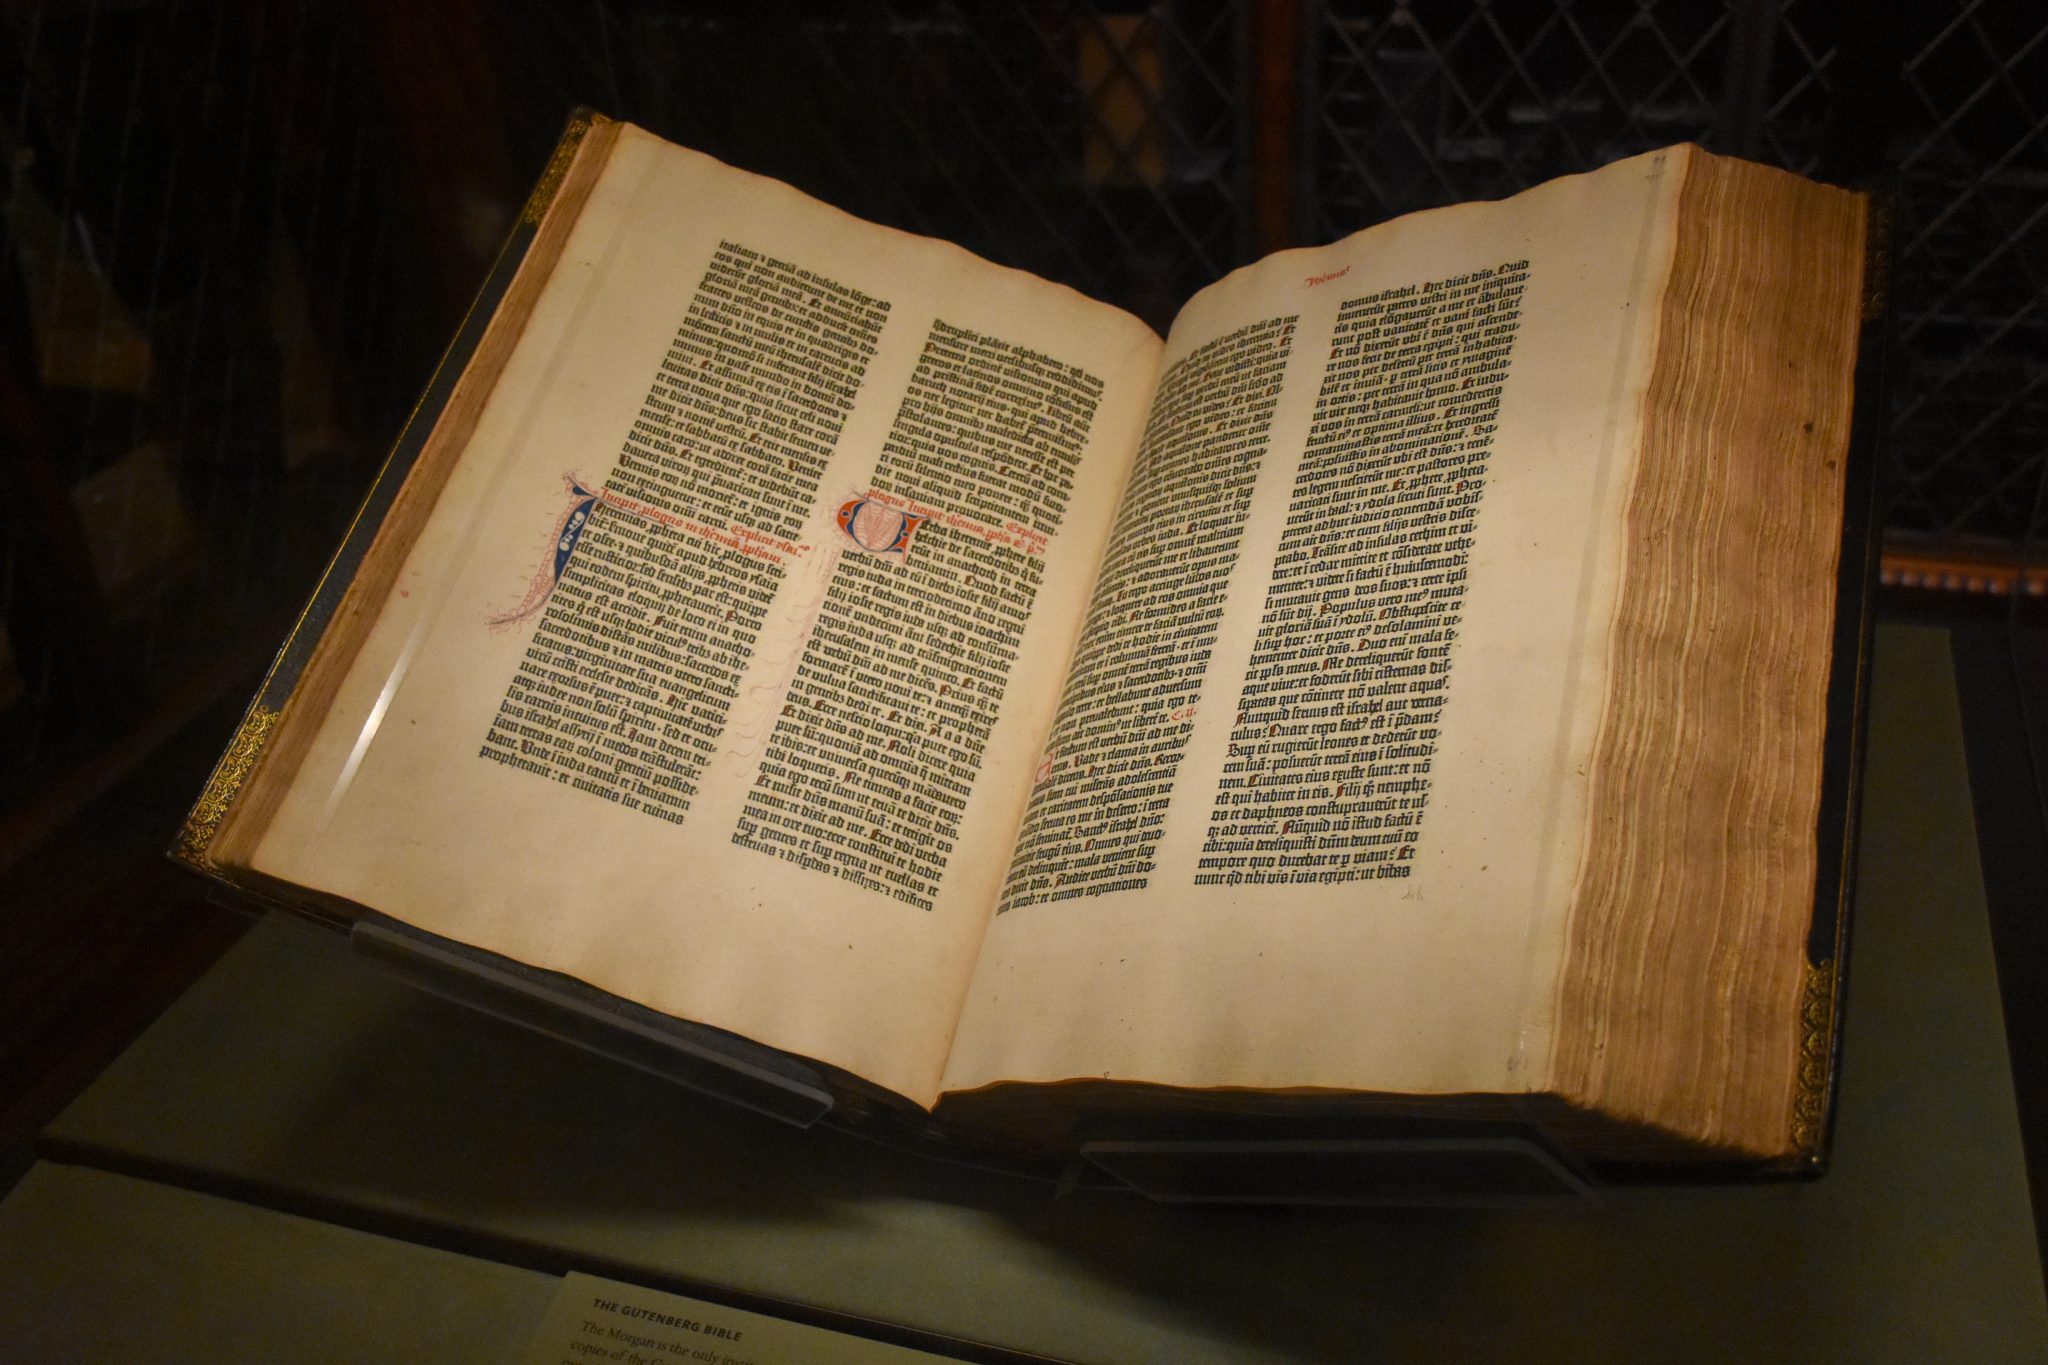 One of the original copies of the Gutenberg Bible in the Morgan Library in New York